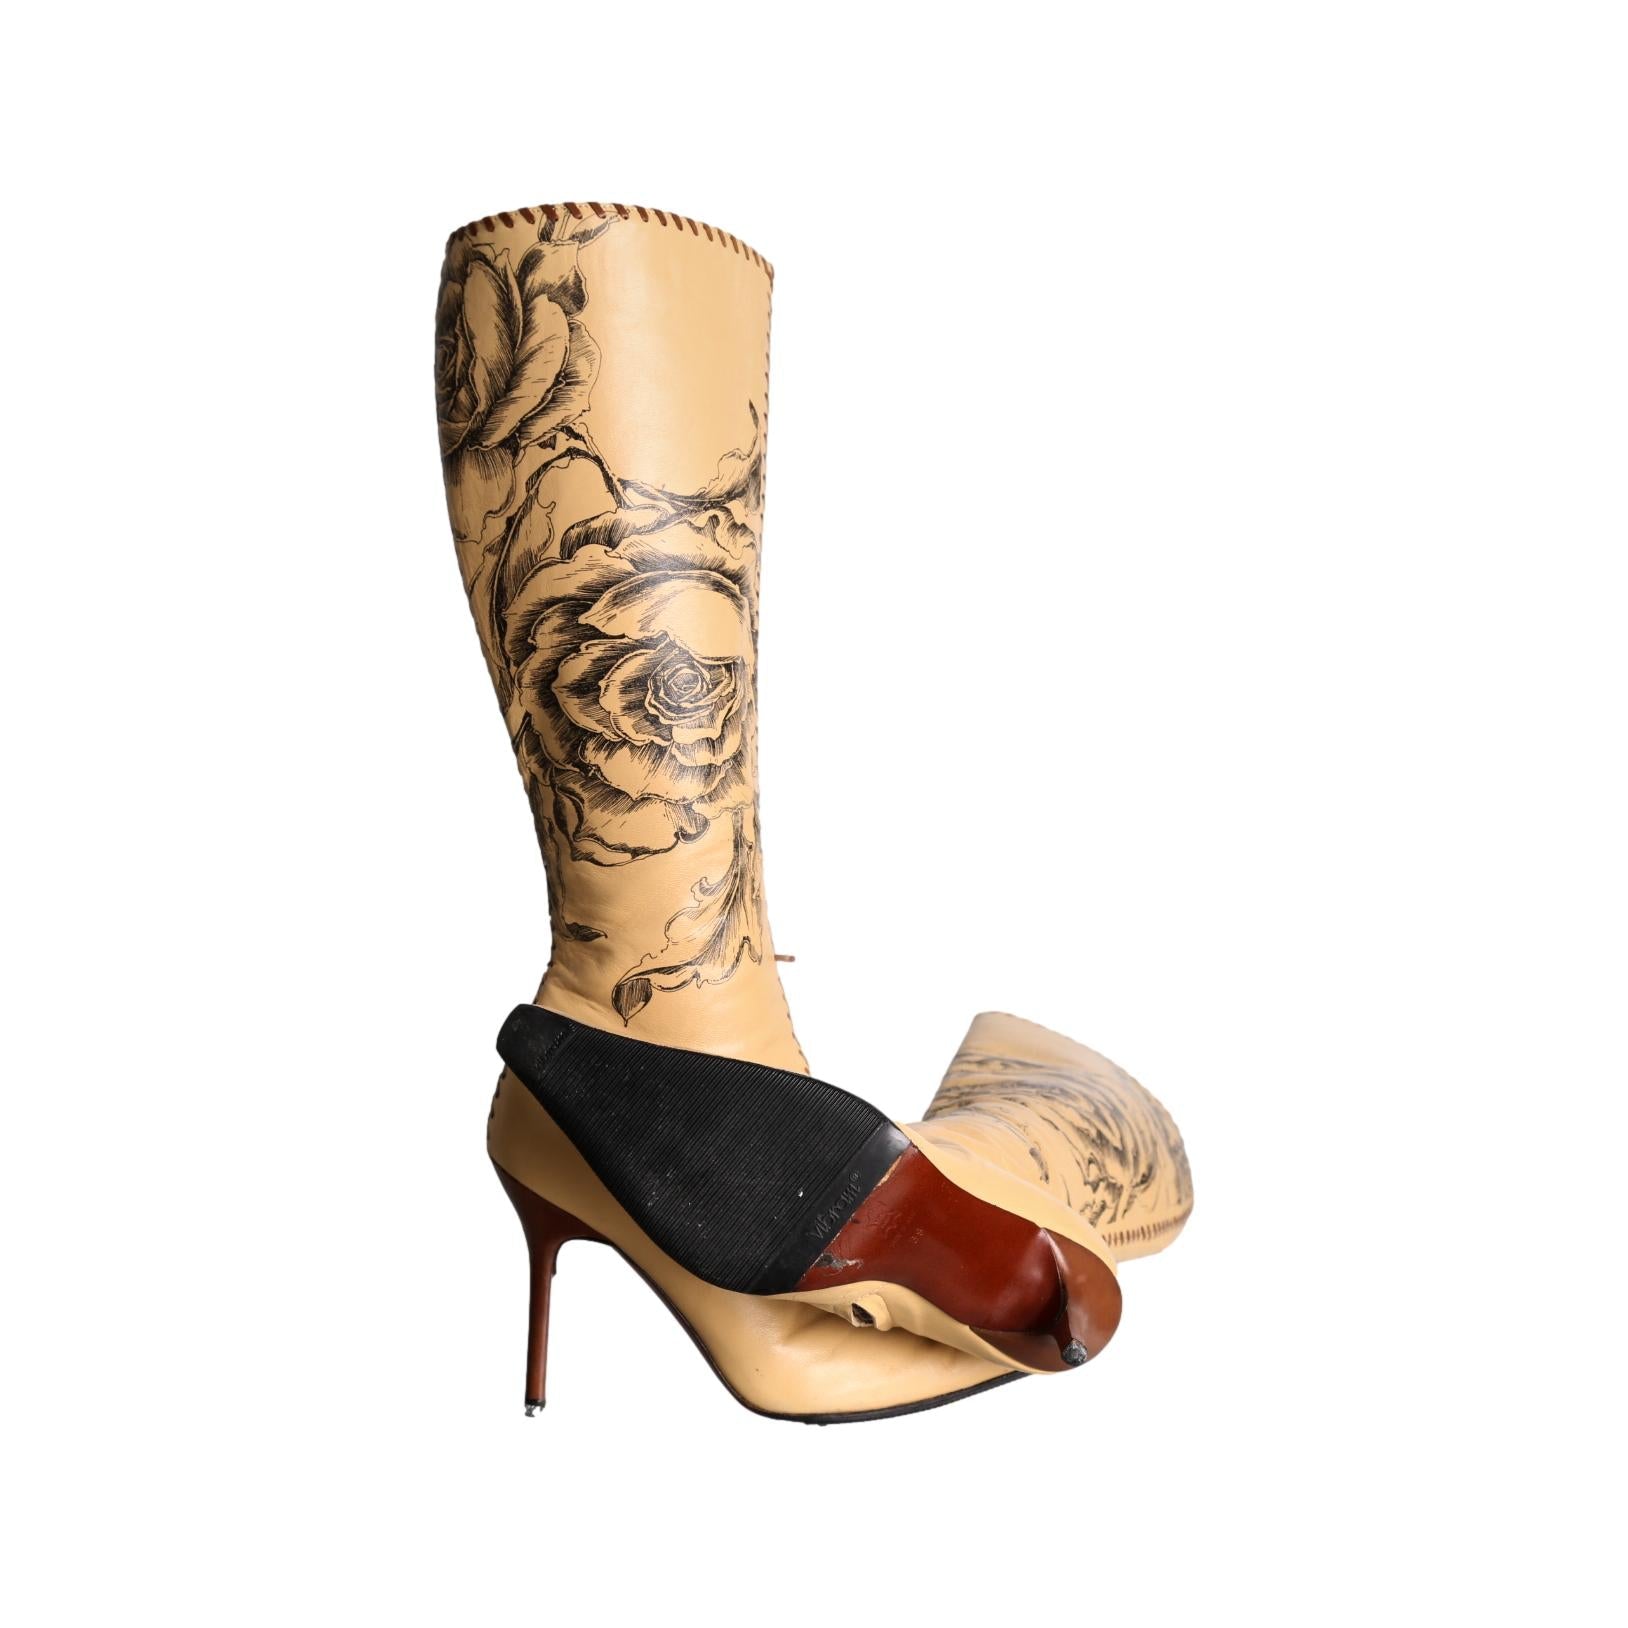 Cavalli Tan Floral Leather Boot - Shoes